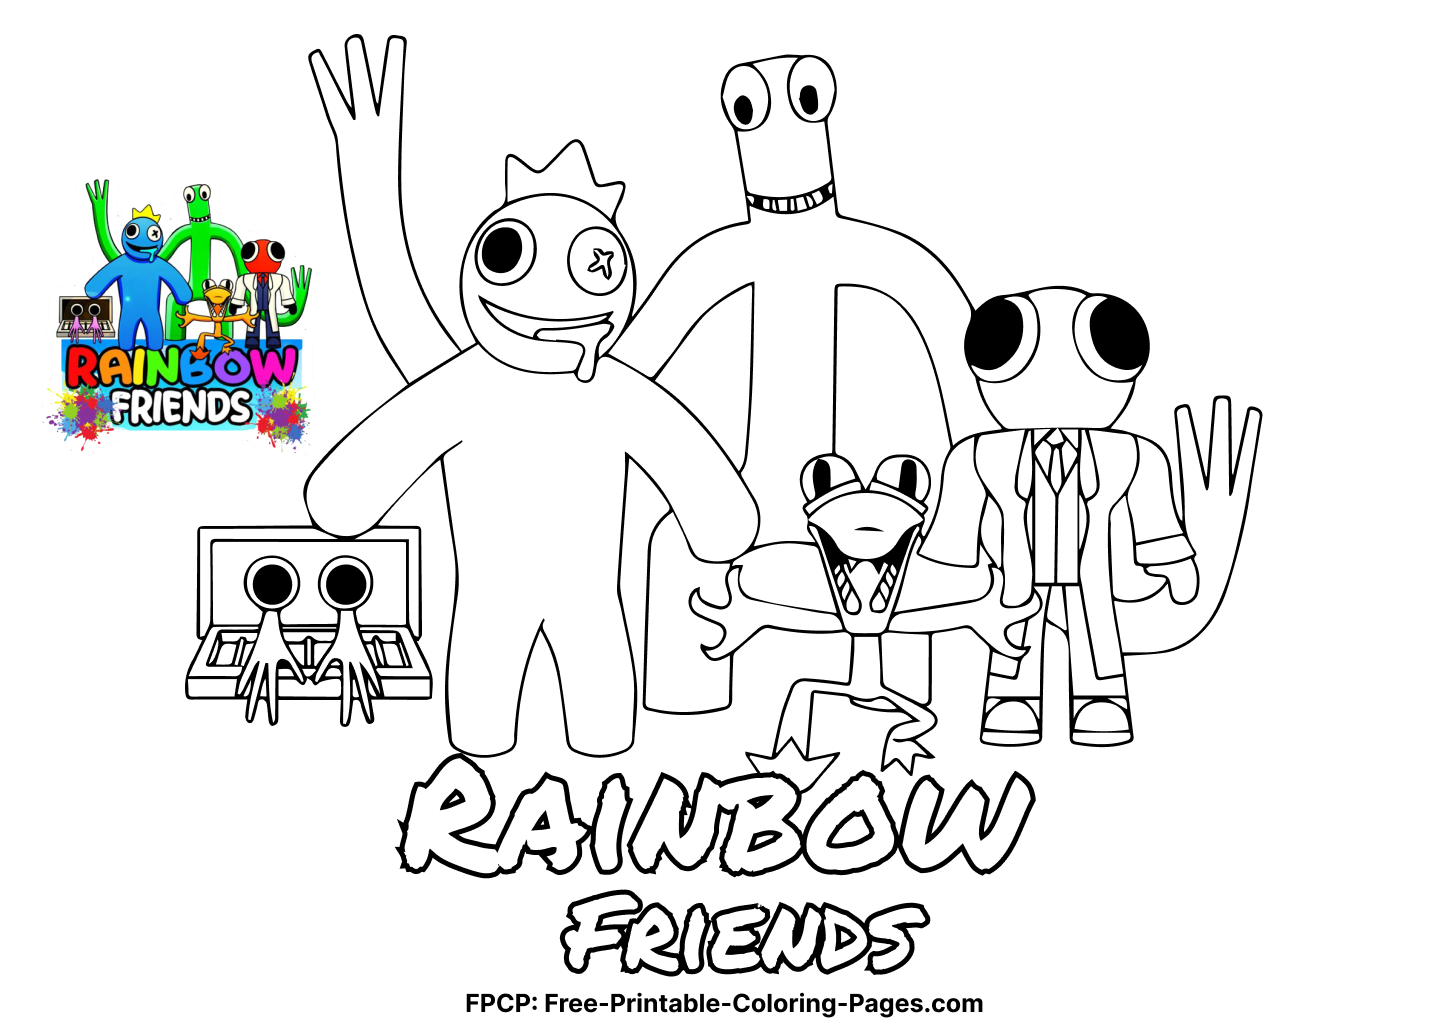 33 Rainbow Friends Coloring Pages In PDF For Printing